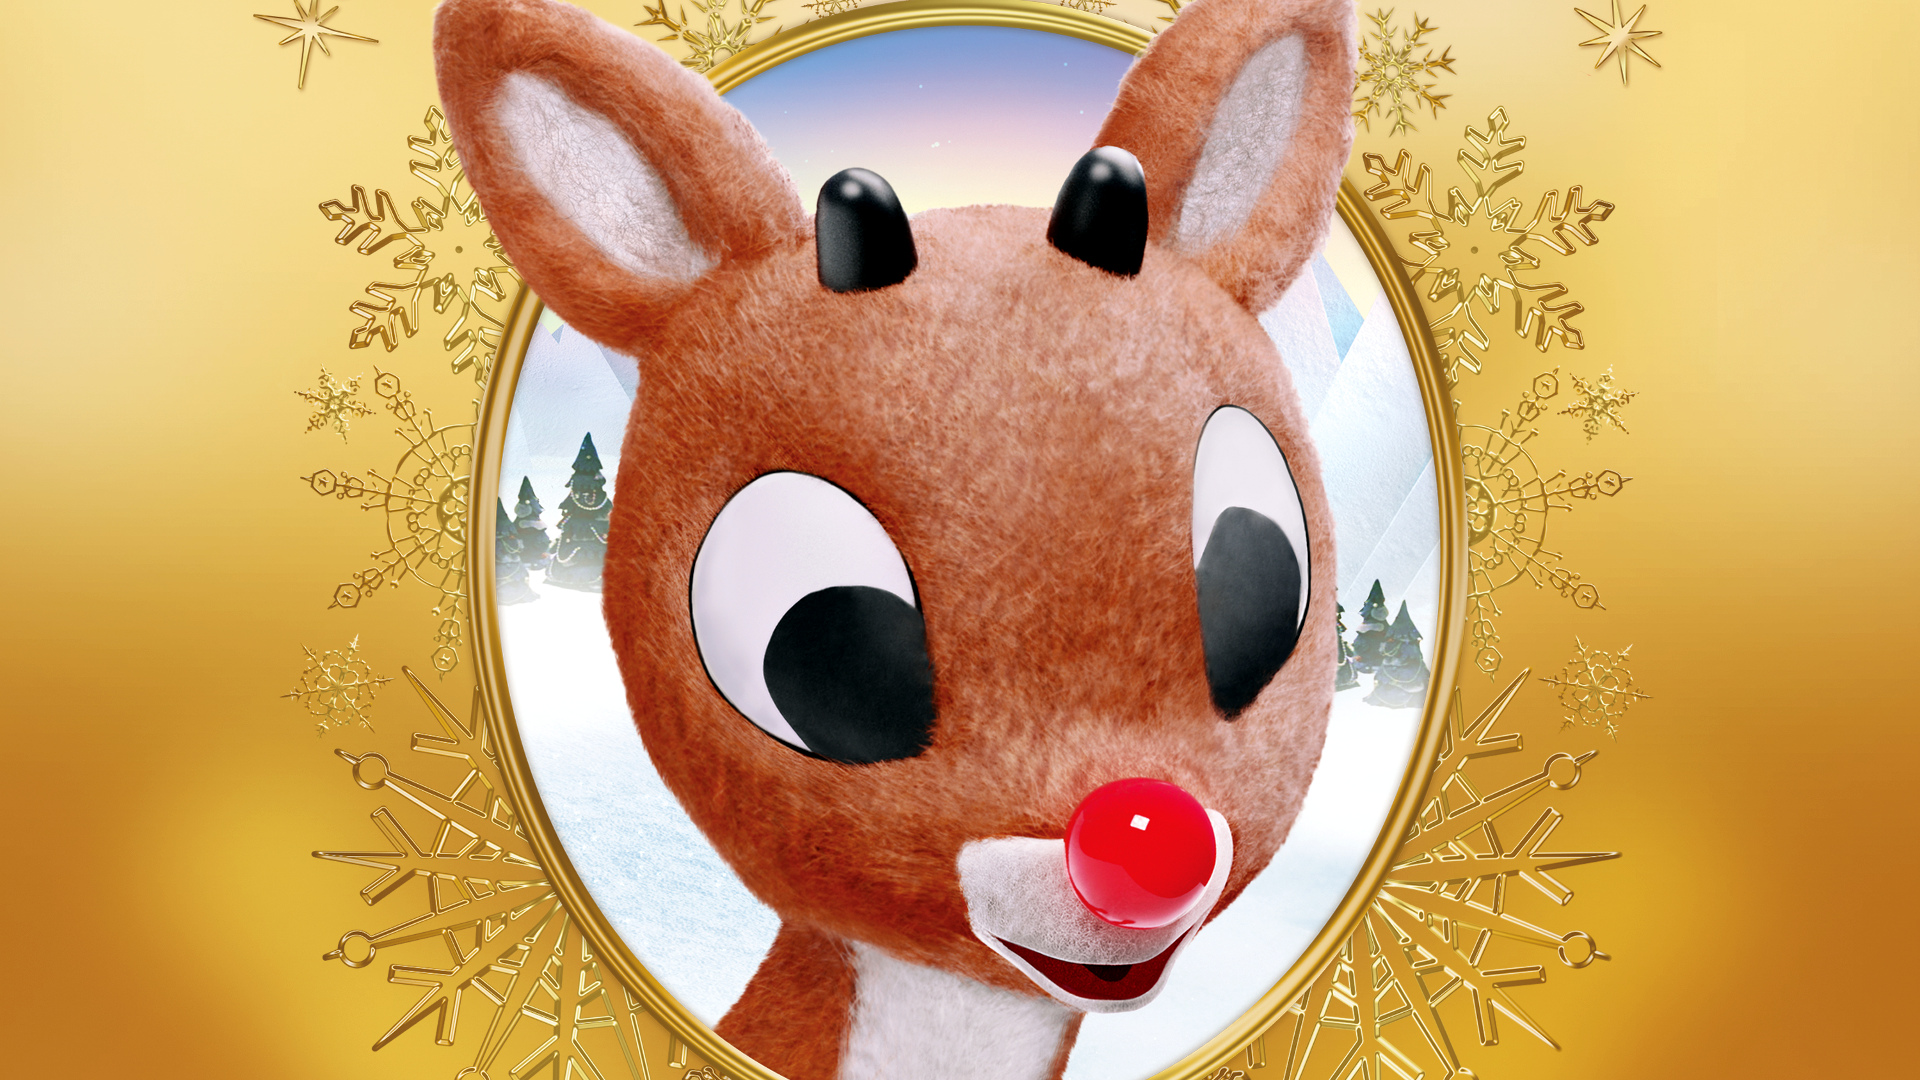 Movie Rudolph The Red-Nosed Reindeer HD Wallpaper | Background Image